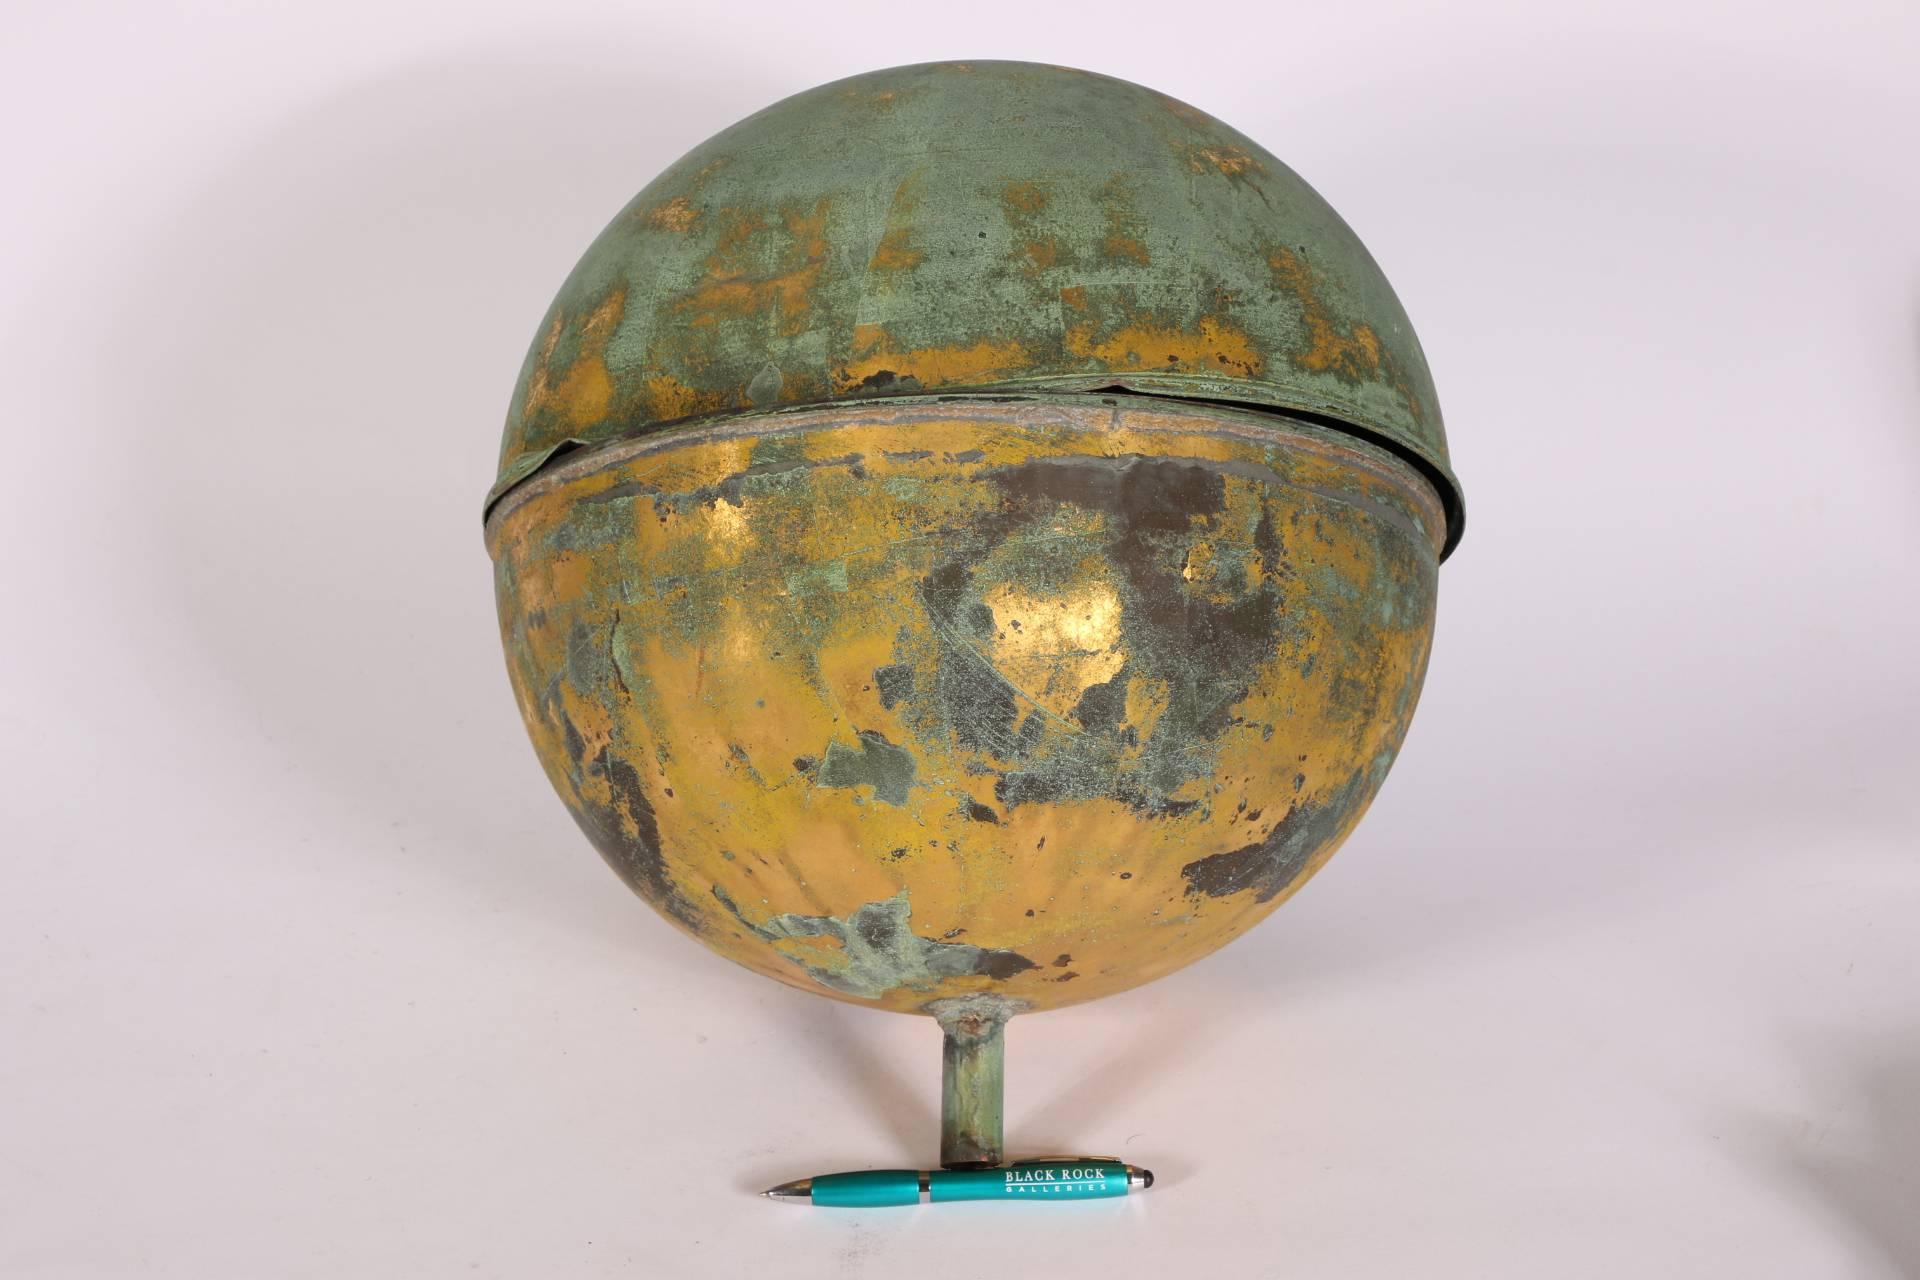 Globe form made in two parts, with a hollow stem for attachment on the base. 
Worn gilt, patches of green patina overall, separation around the center seam, ding, all as expected with use.